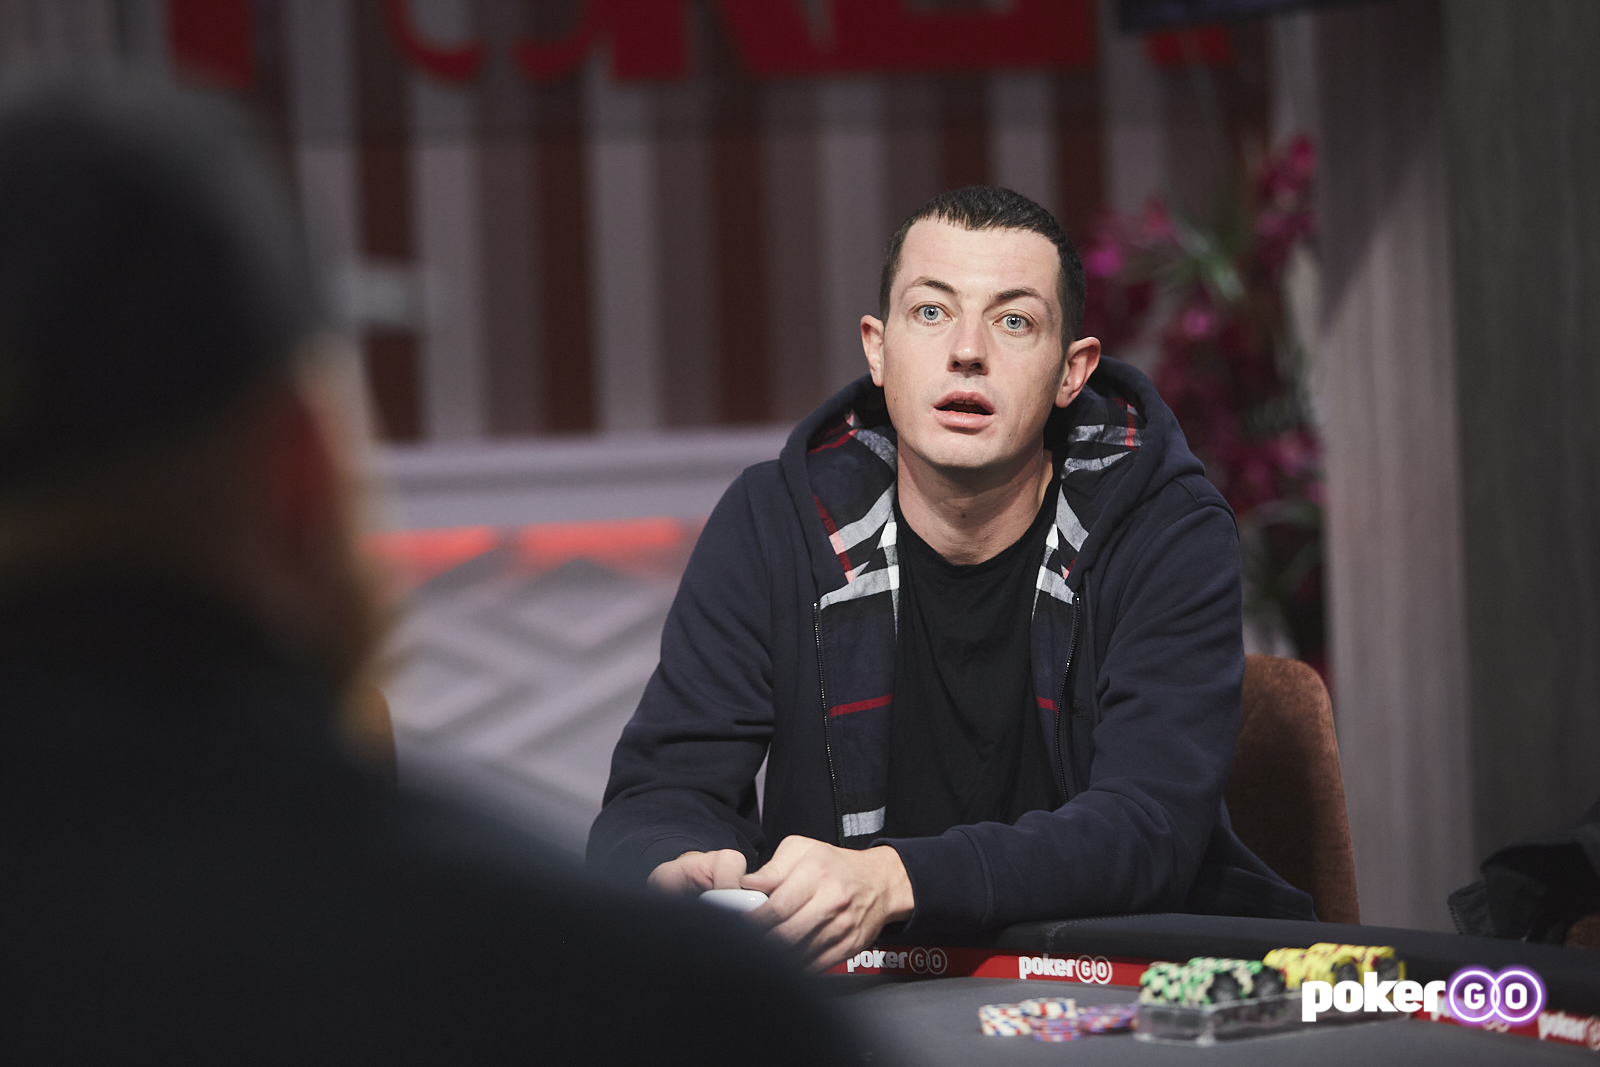 Hellmuth Blows Up, Dwan Runs into Quads on ‘High Stakes Poker’ Episode 10